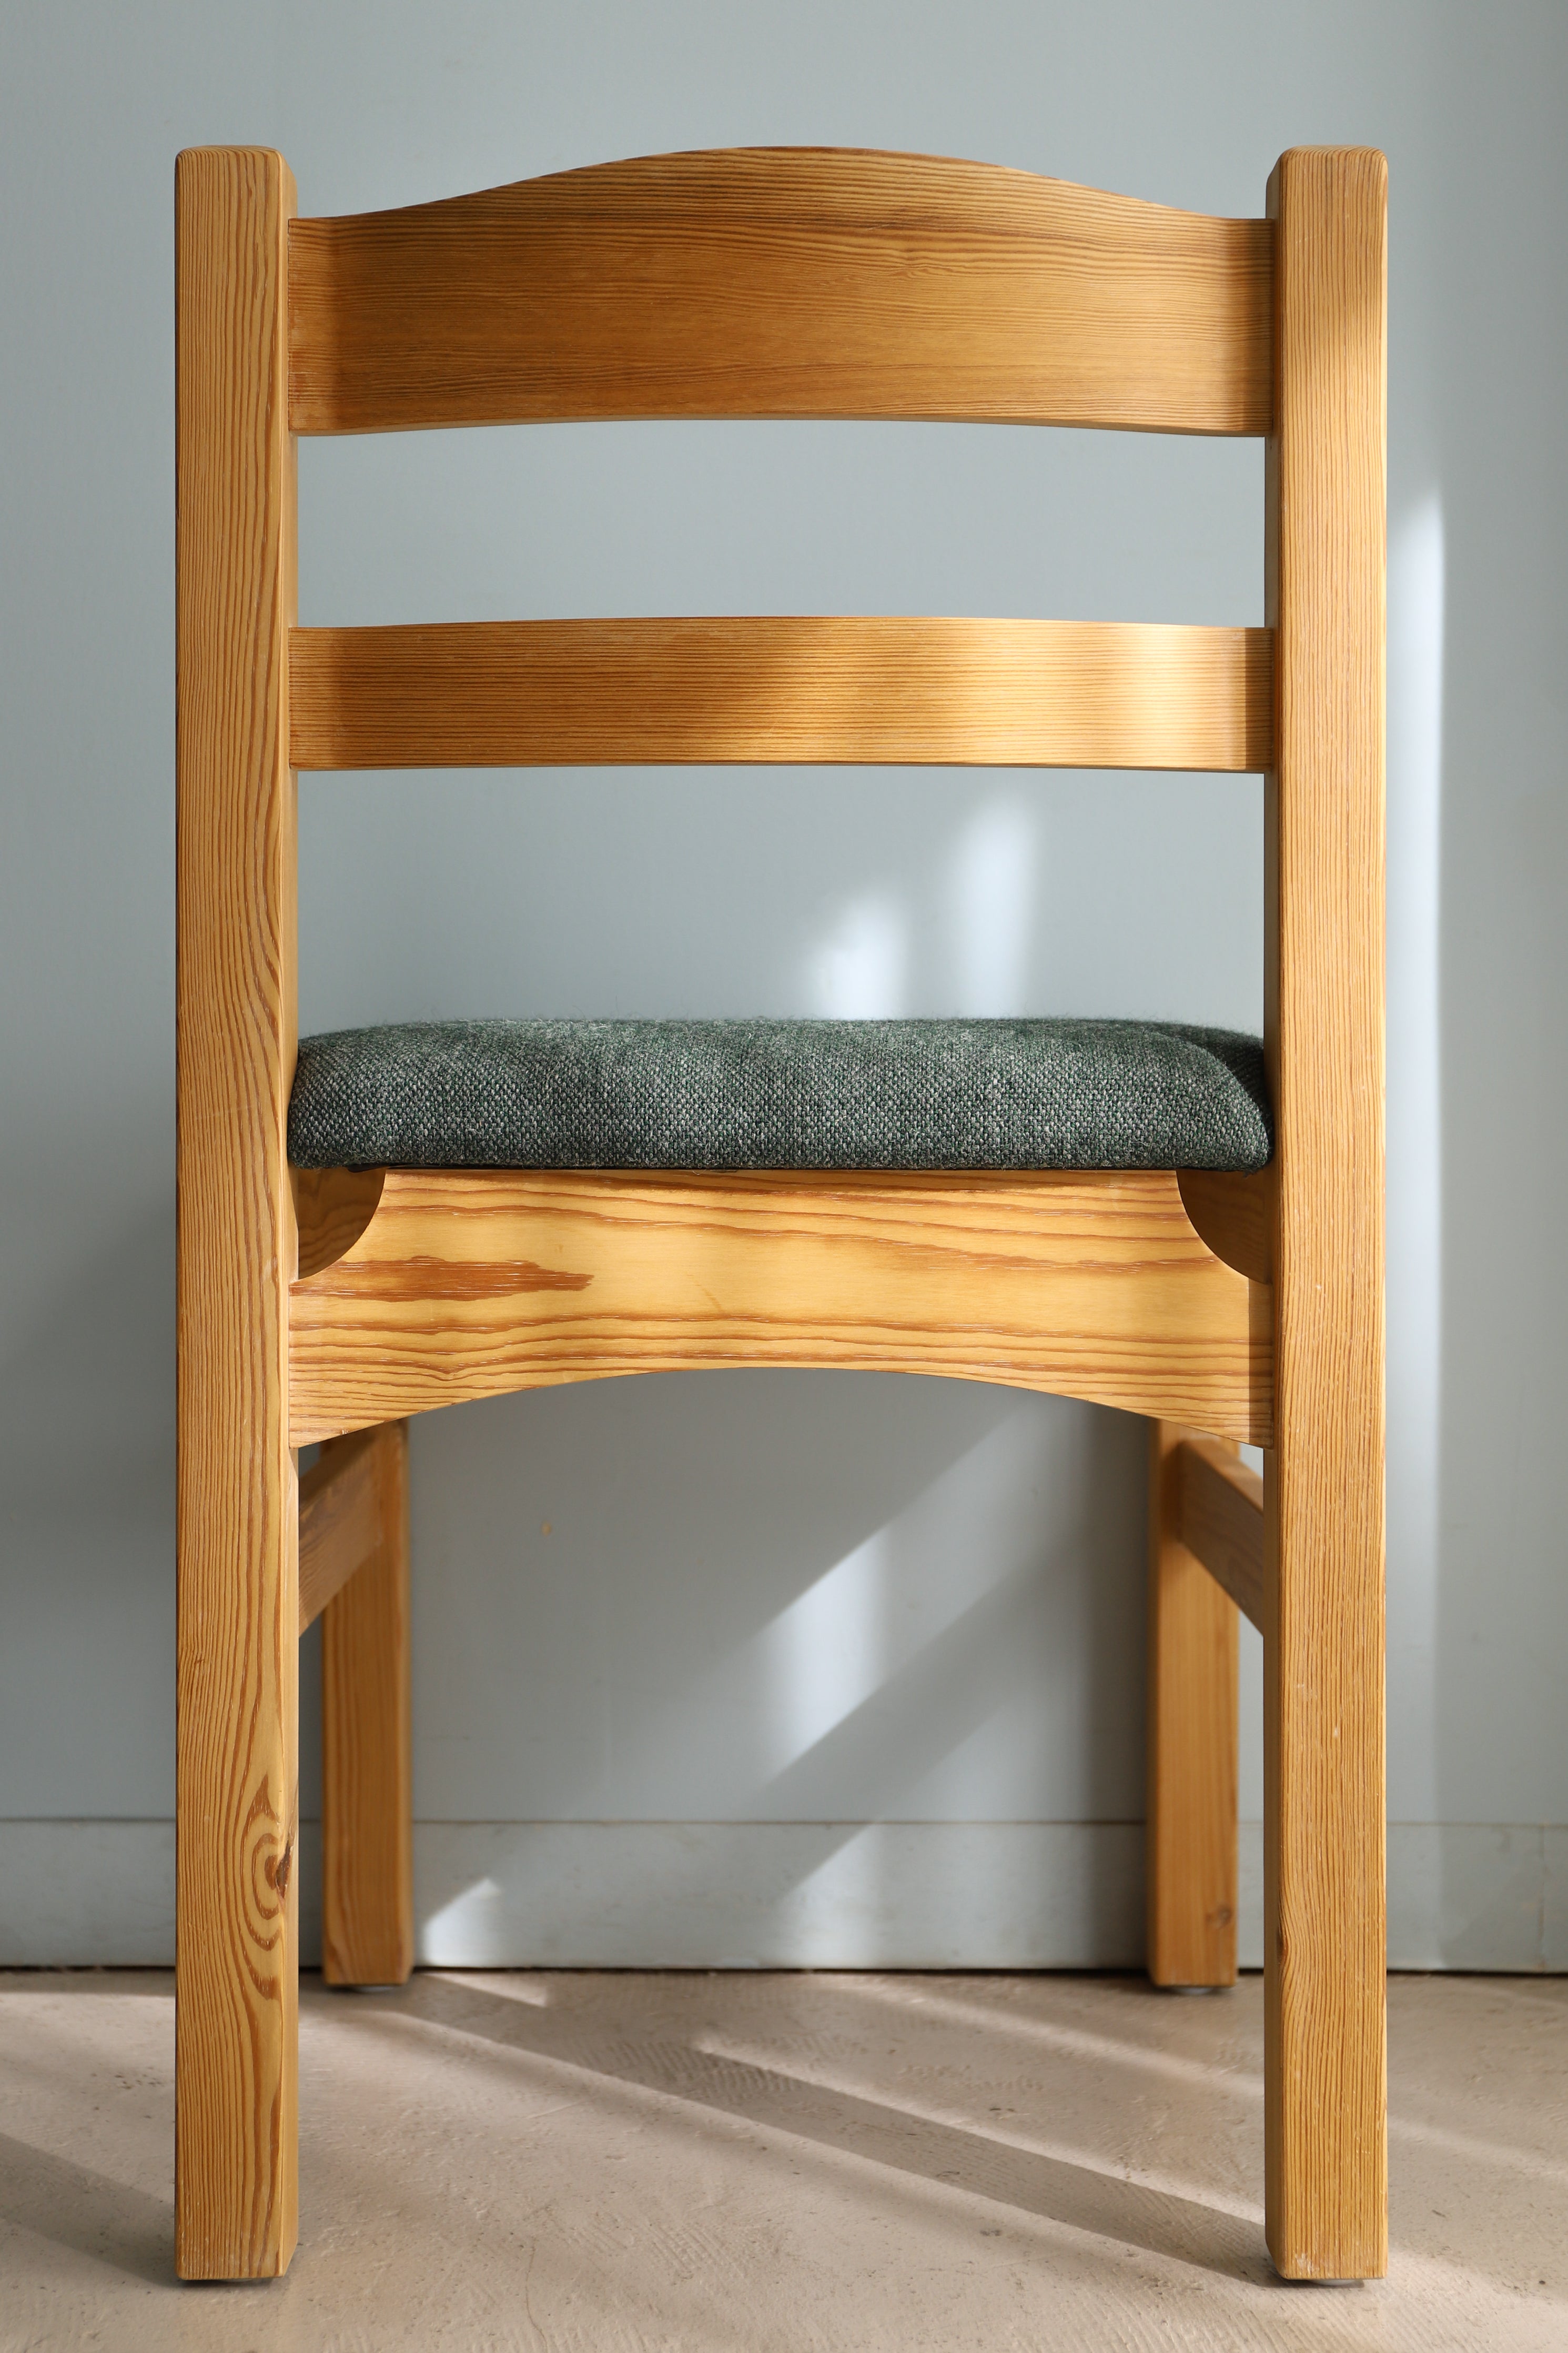 Pinewood Dining Chair Danish Vintage/デンマークヴィンテージ ダイニングチェア パイン材 椅子 北欧家具